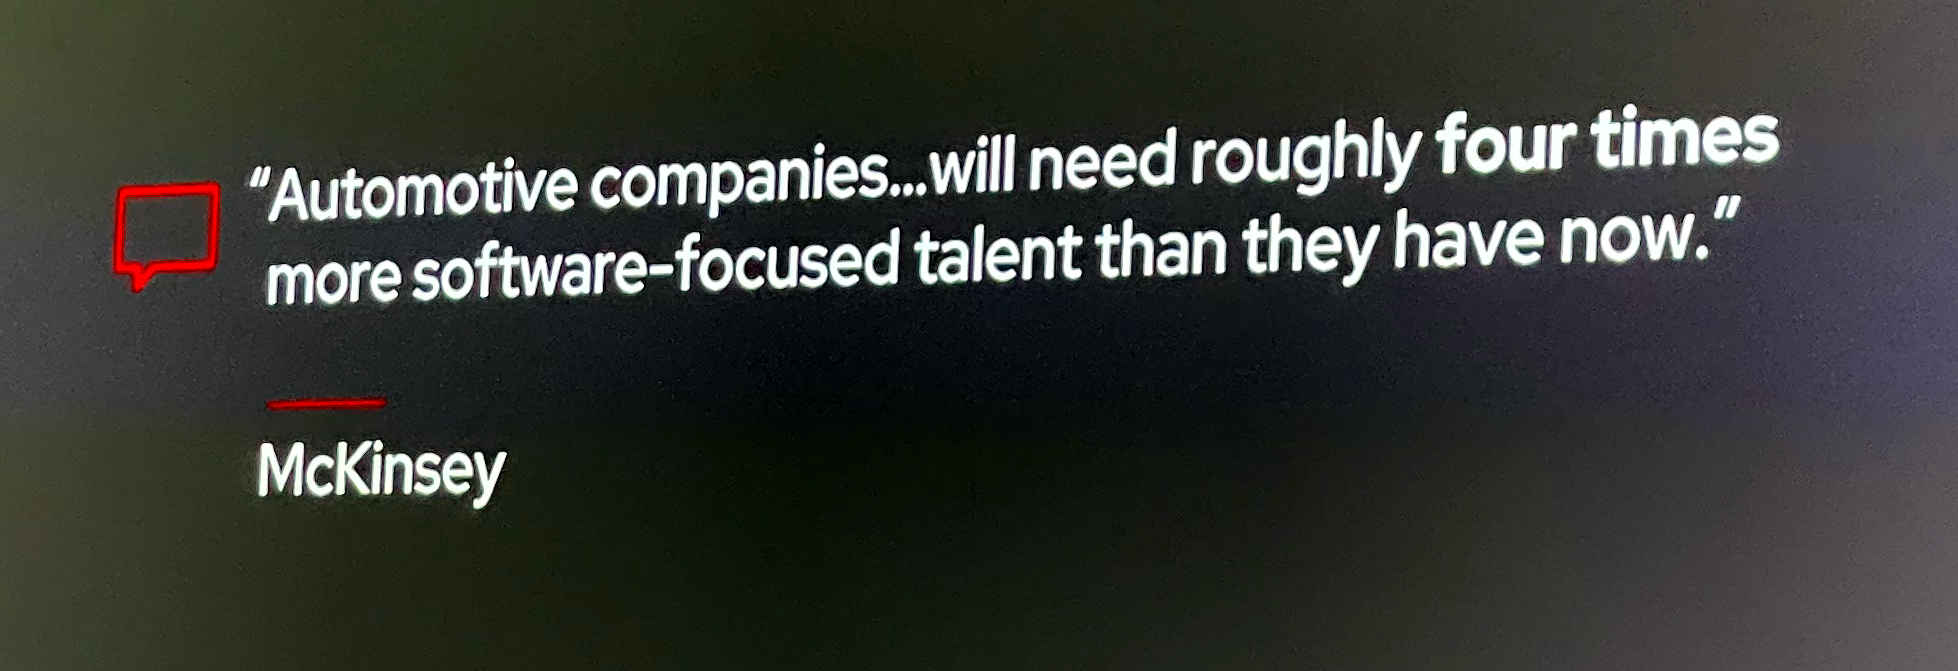 A slide with a quote stating that automobile companies will need more than four times of the software talent they have now